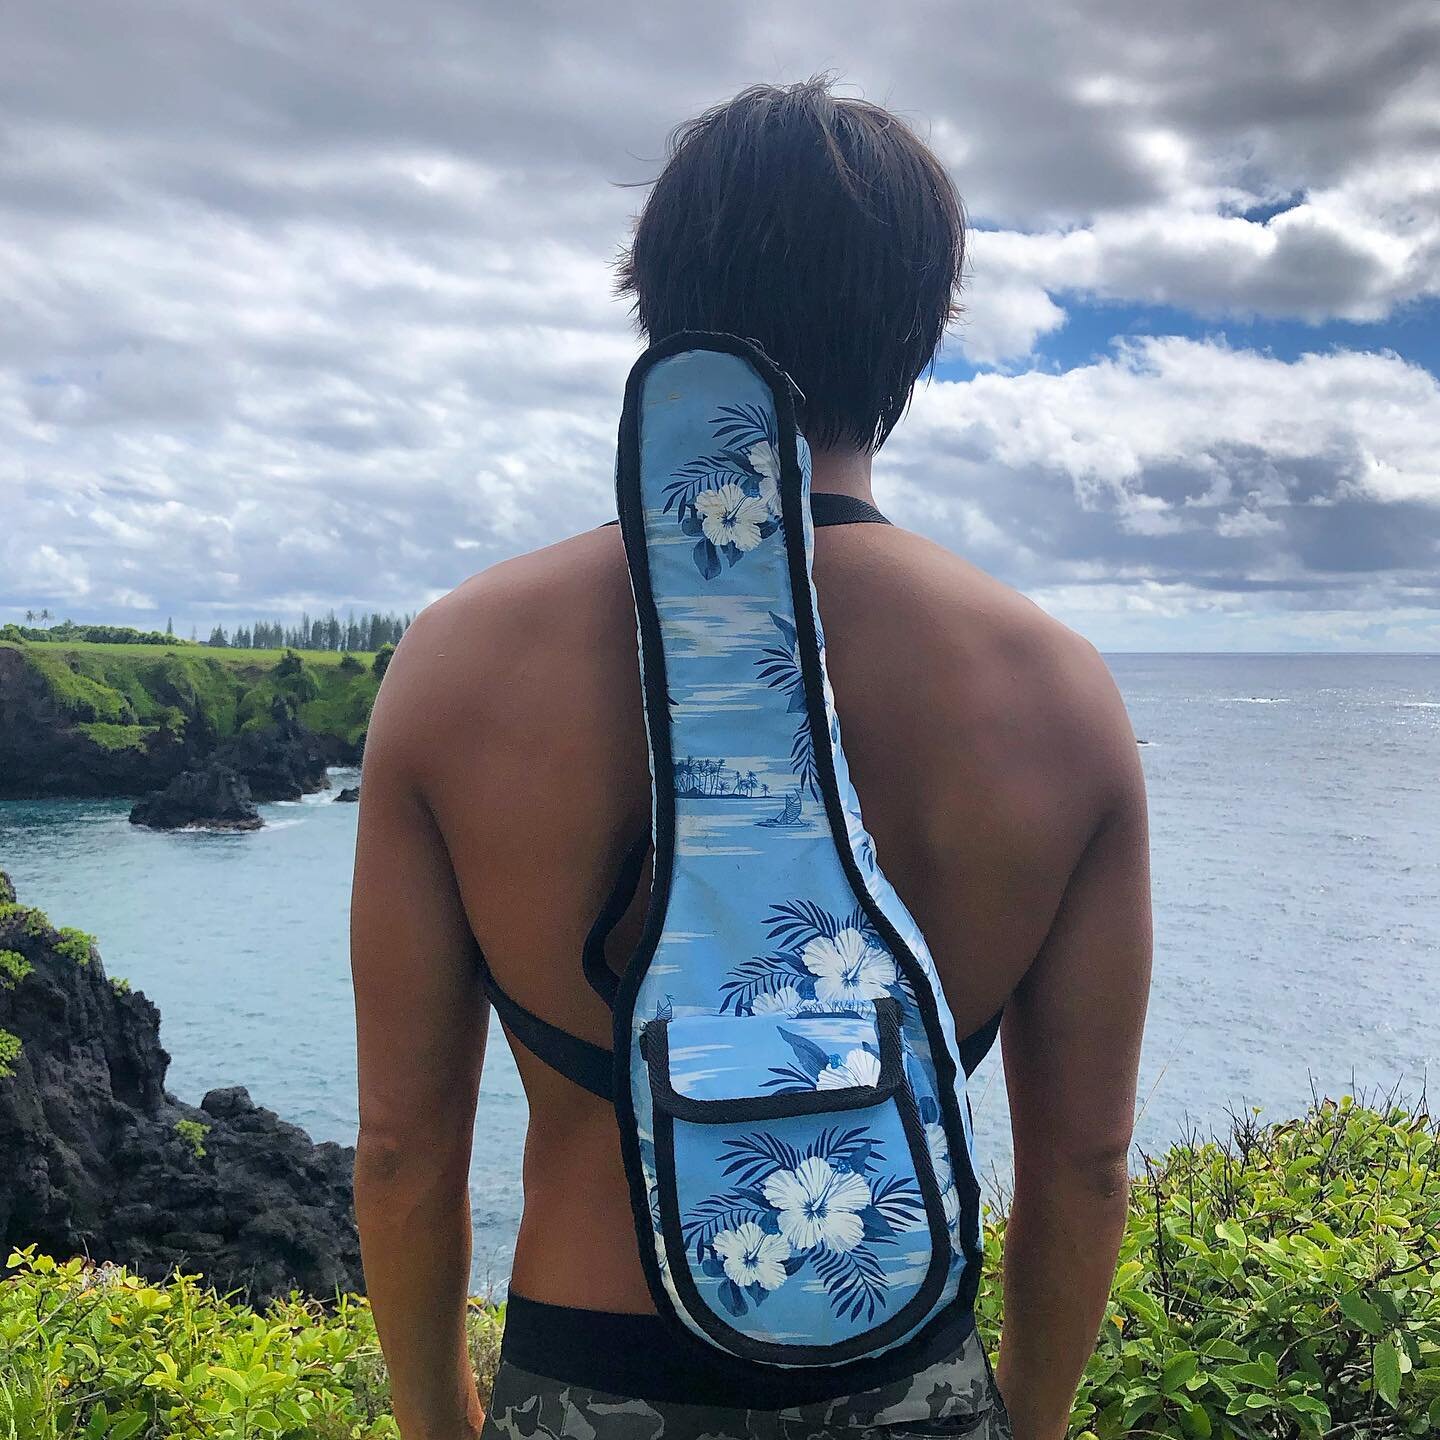 Soprano ukuleles are the PERFECT size for any adventure, especially when it&rsquo;s snug and safe in a backpack case 🤙🏾 shop our instruments &amp; accessories at our Wailuku store or online! 🎶 #MeleNoKaOi #TravelMusician #Ukulele #UkuleleCase #Uku